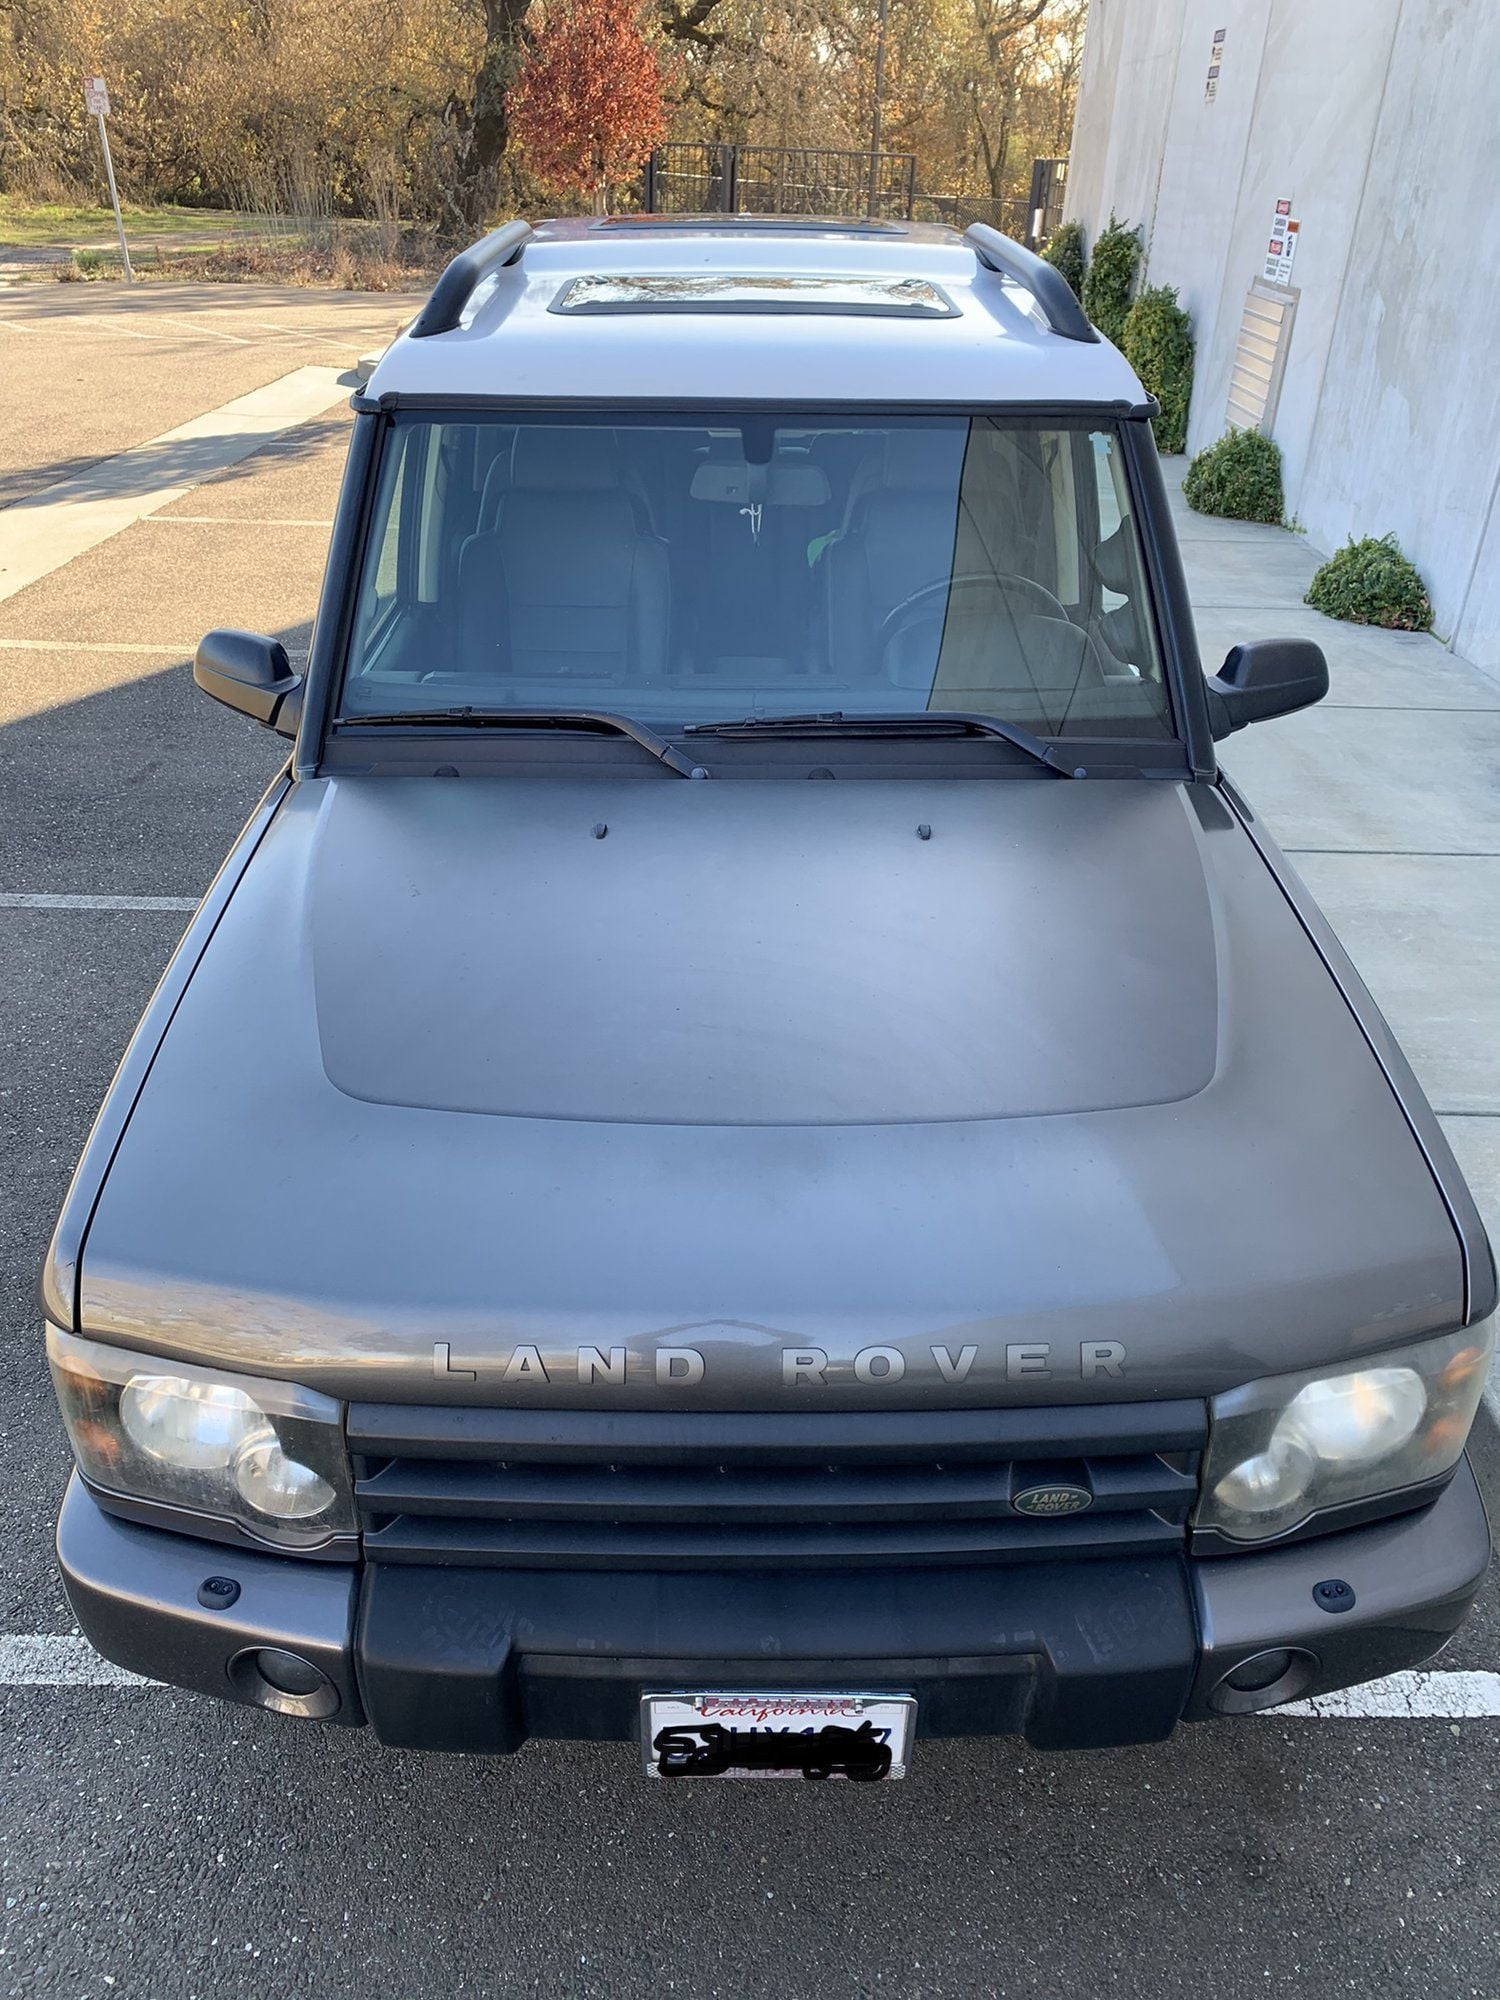 2004 Land Rover Discovery - 04 D2- Turner engine already installed - Used - VIN salty19444a830894 - 121,000 Miles - 8 cyl - 4WD - Automatic - SUV - Gray - Windsor, CA 95492, United States